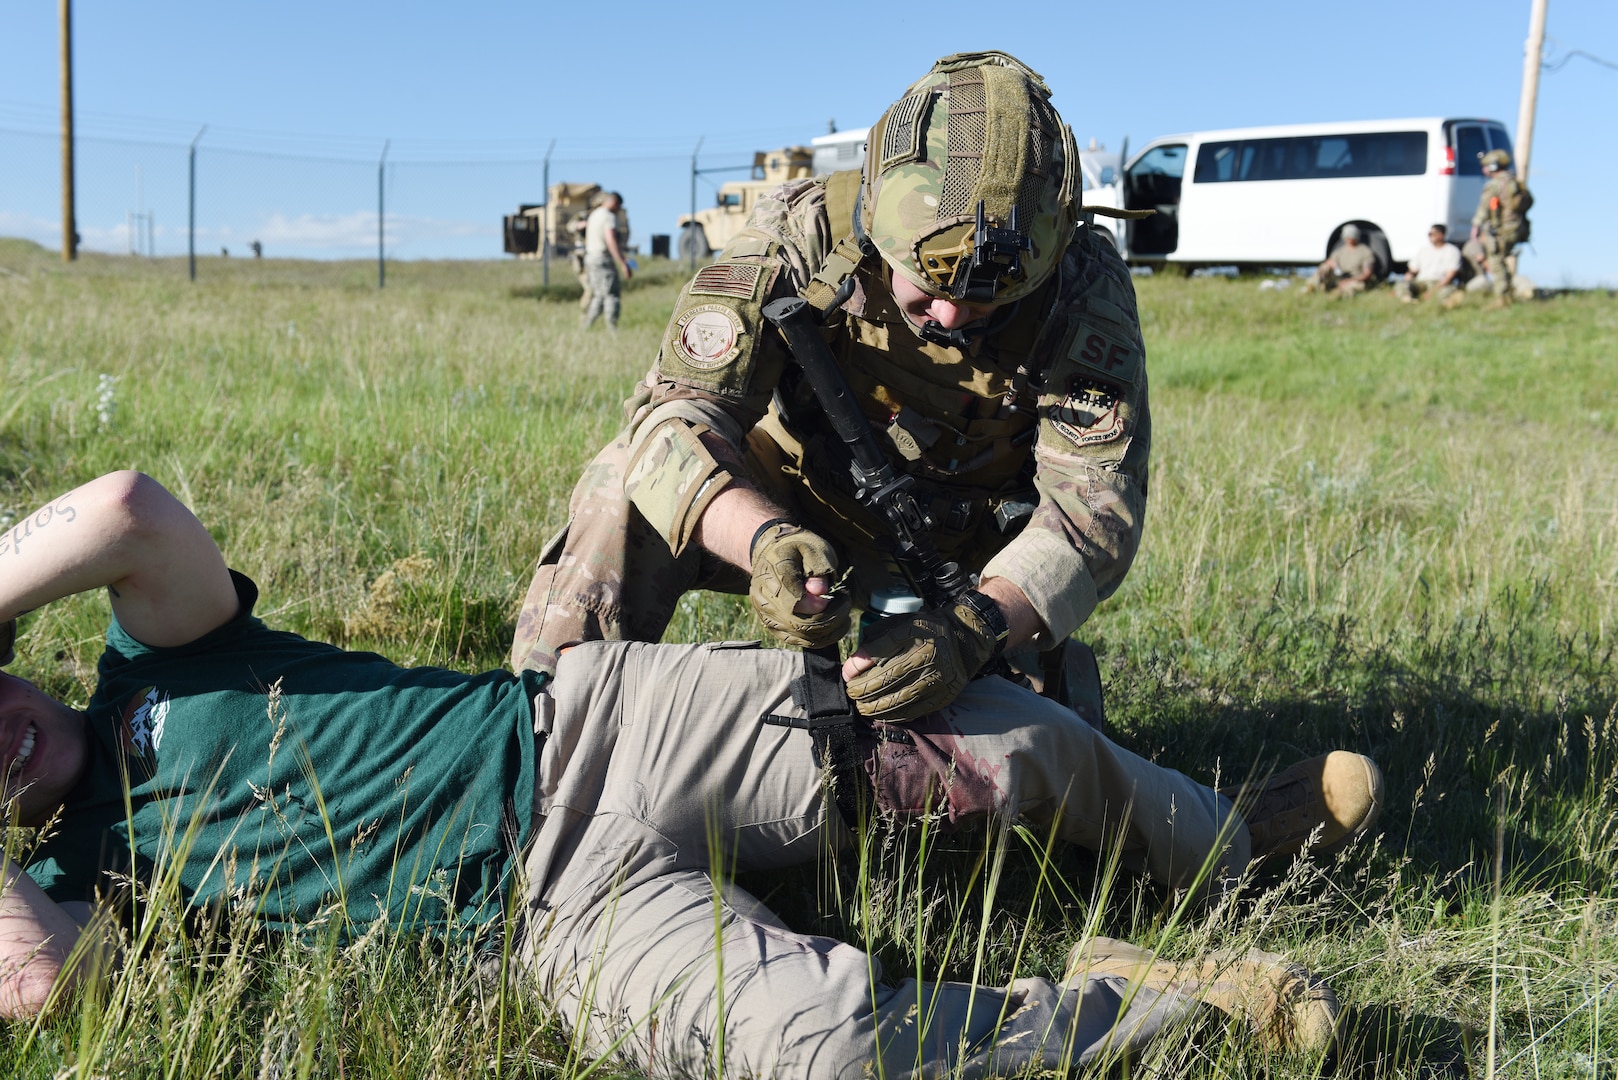 An Airman with the 341st Security Support Squadron tactical response force provides Tactical Combat Casualty Care during an integrated recapture and recovery exercise June 11, 2019, at an intercontinental ballistic missile launch facility near Simms, Mont.